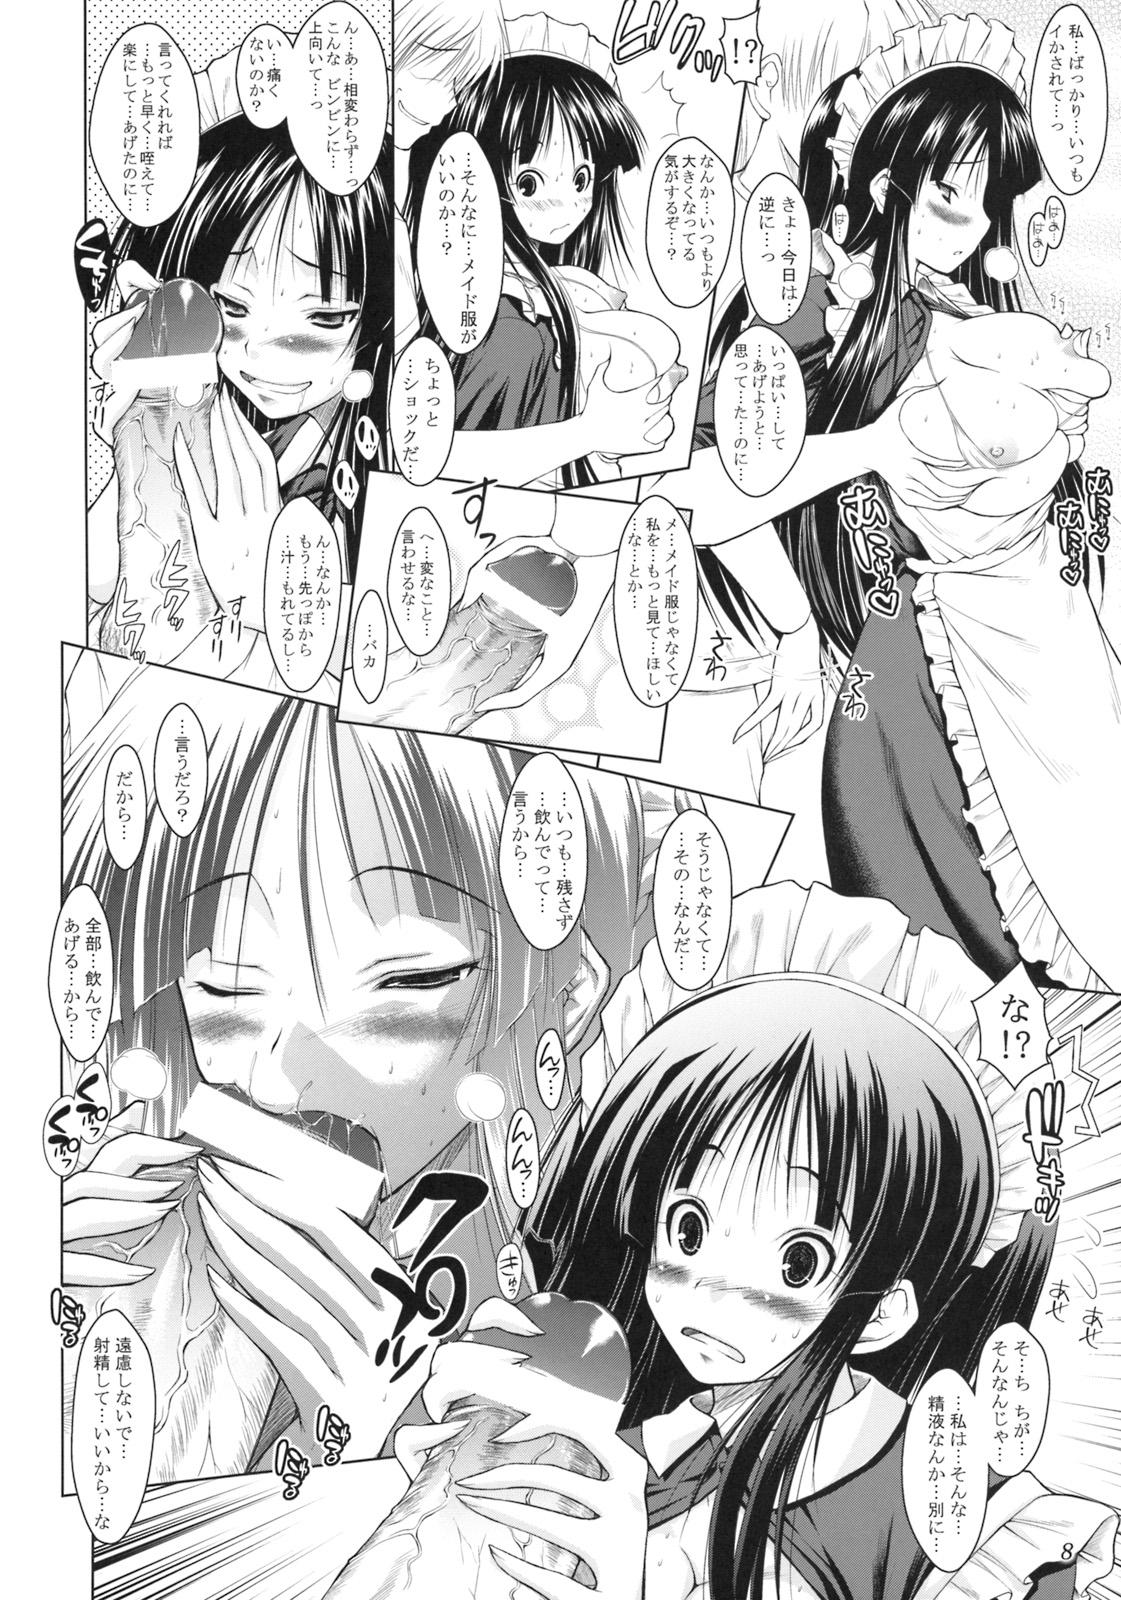 Real Amateurs Miocchi Maid. - K-on Ddf Porn - Page 7